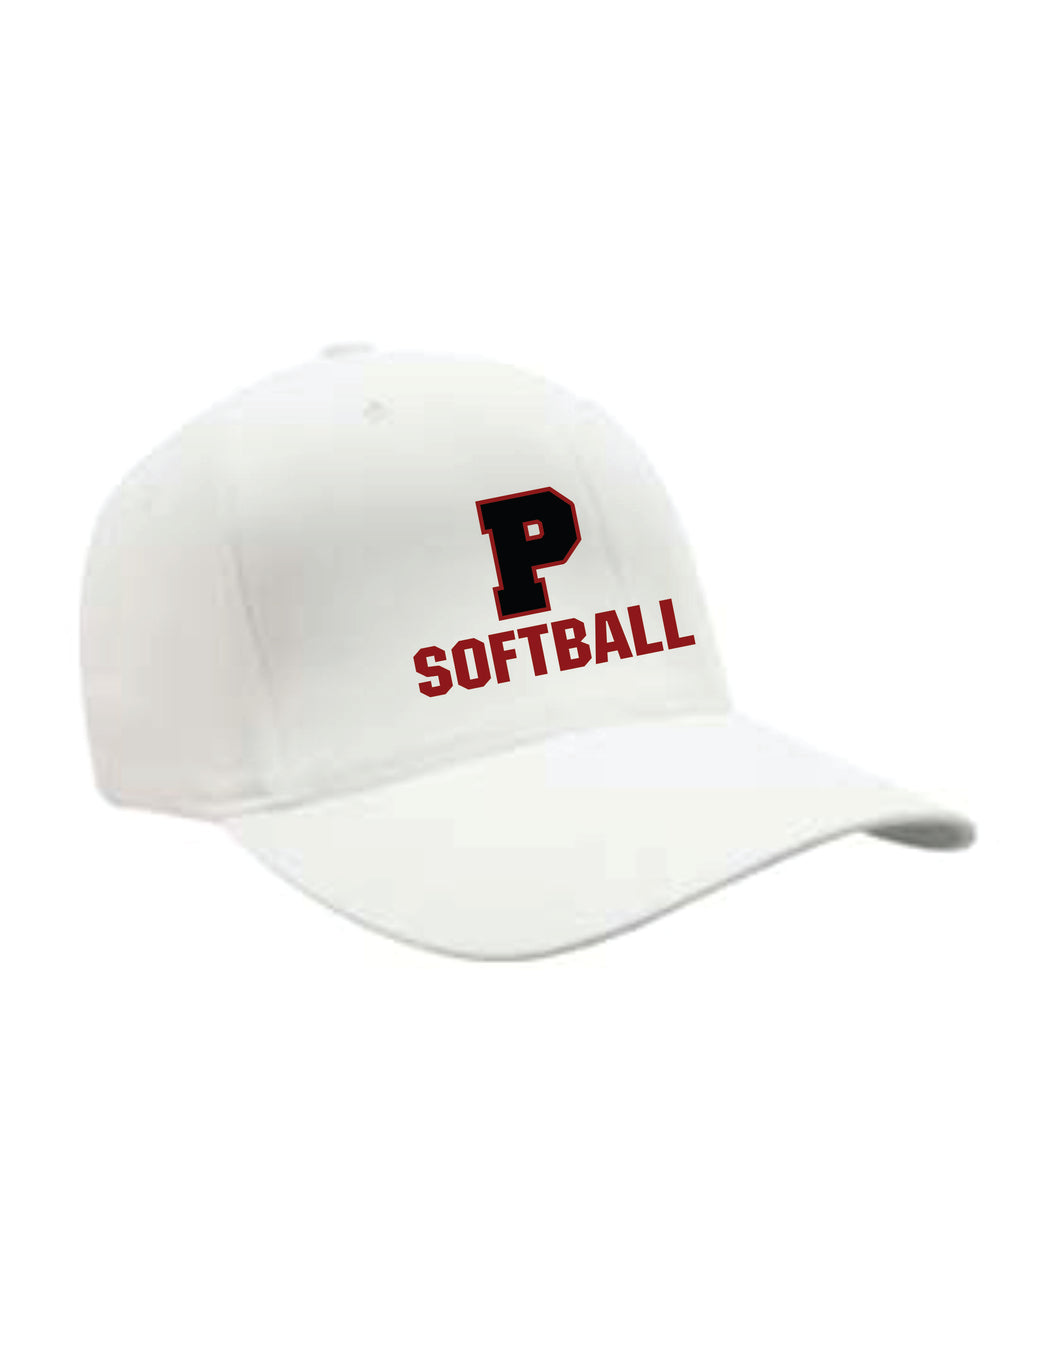 PHS Softball Fitted Hat